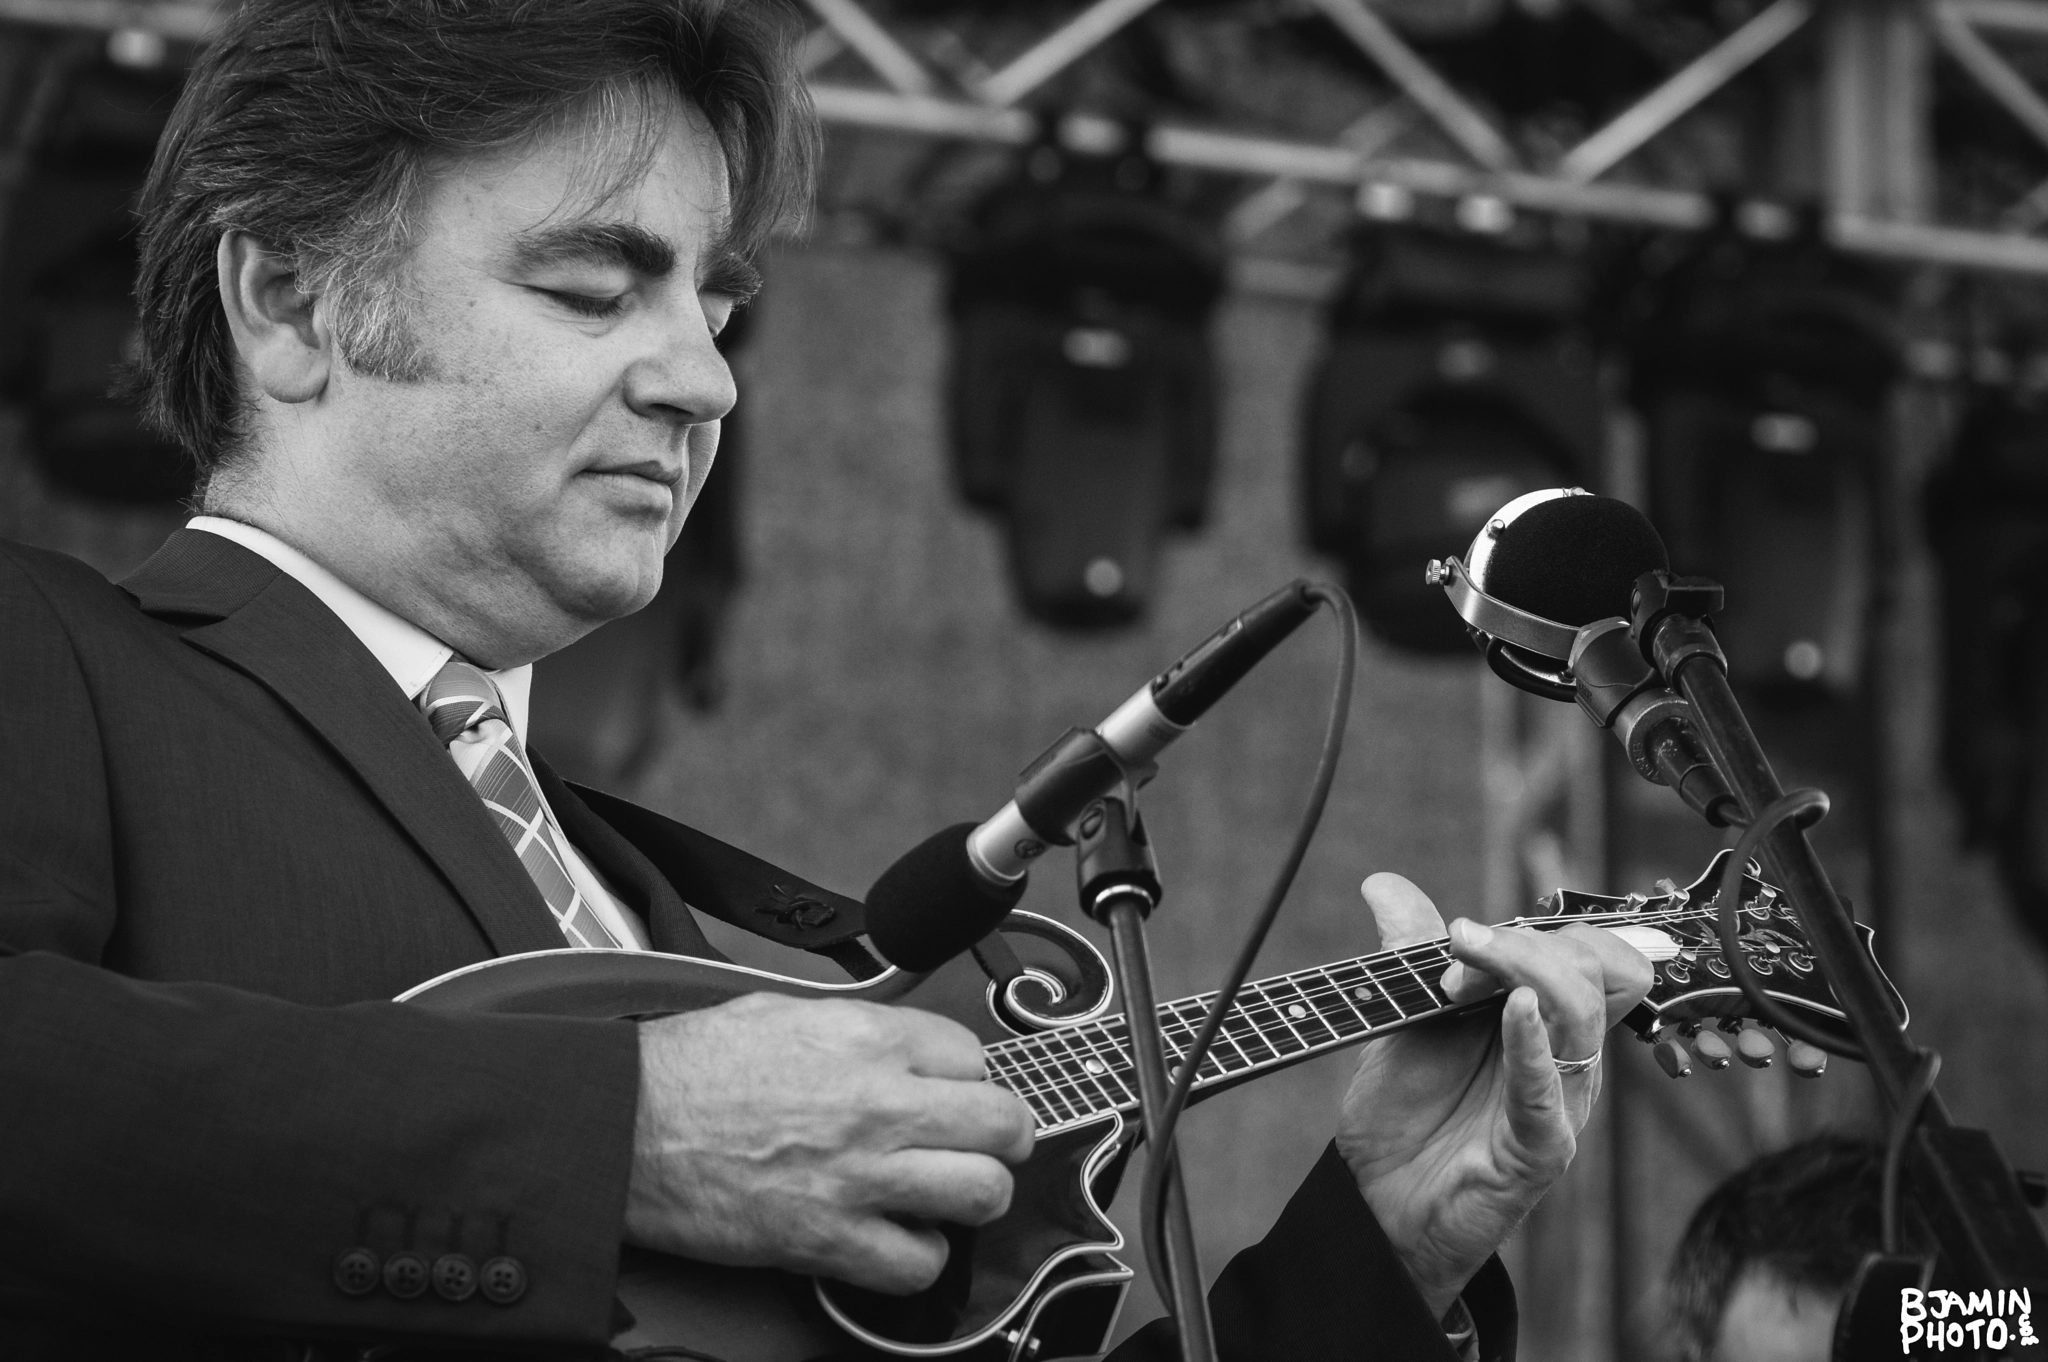 Pentax K-3 II sample photo. Ronnie mccoury of the del mccoury band photography